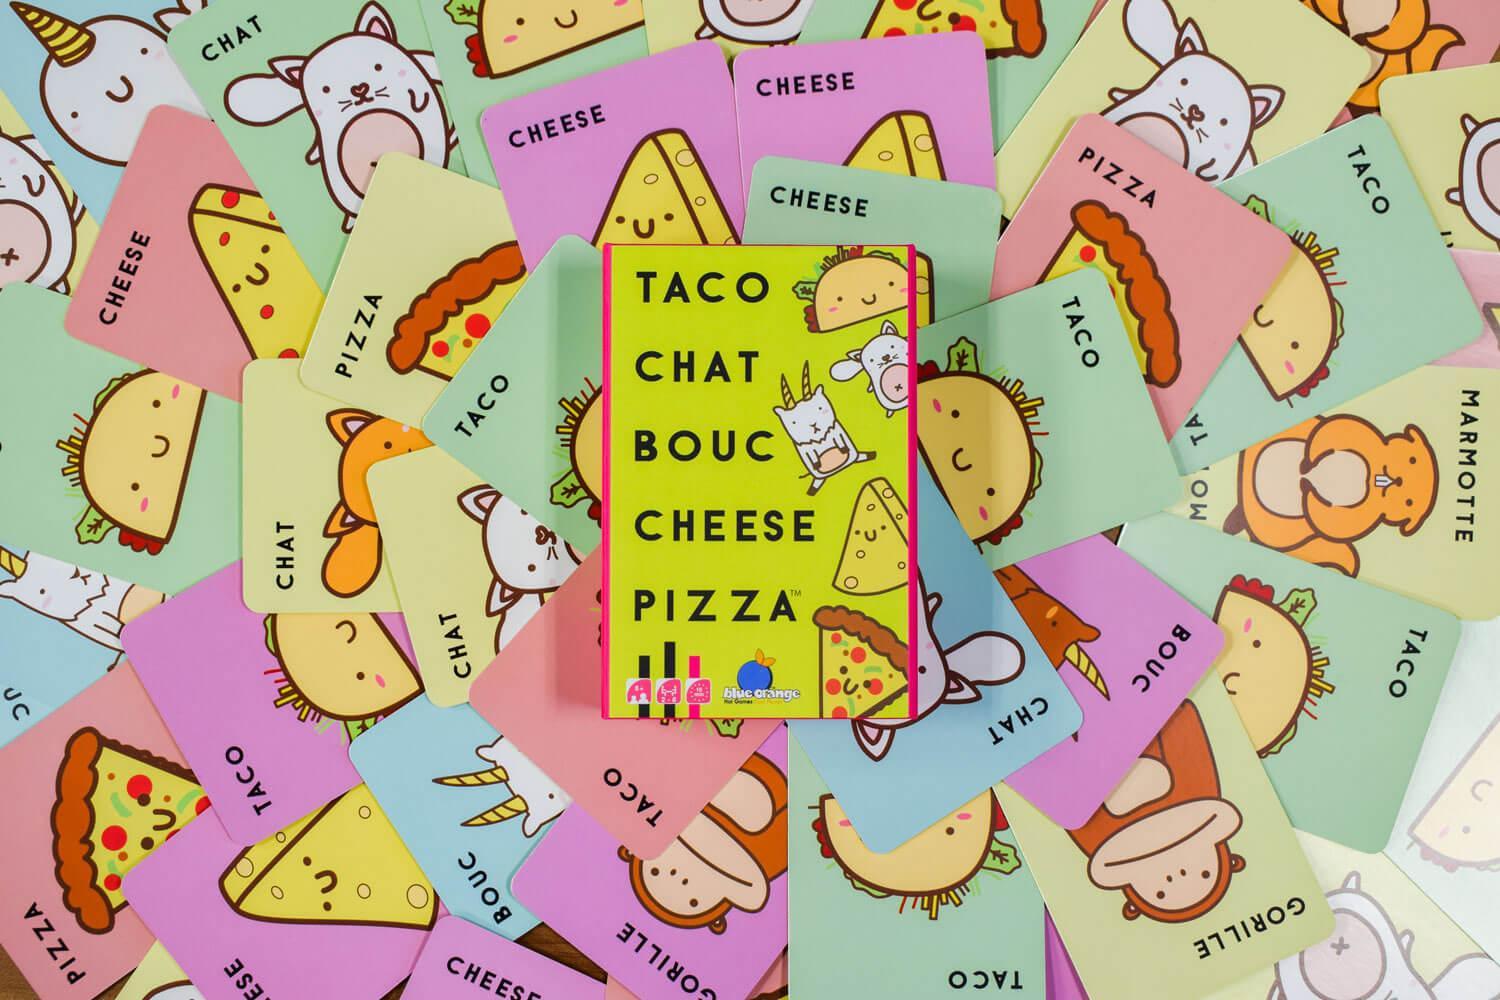 Taco Cat Goat Cheese Pizza - The Card Vault